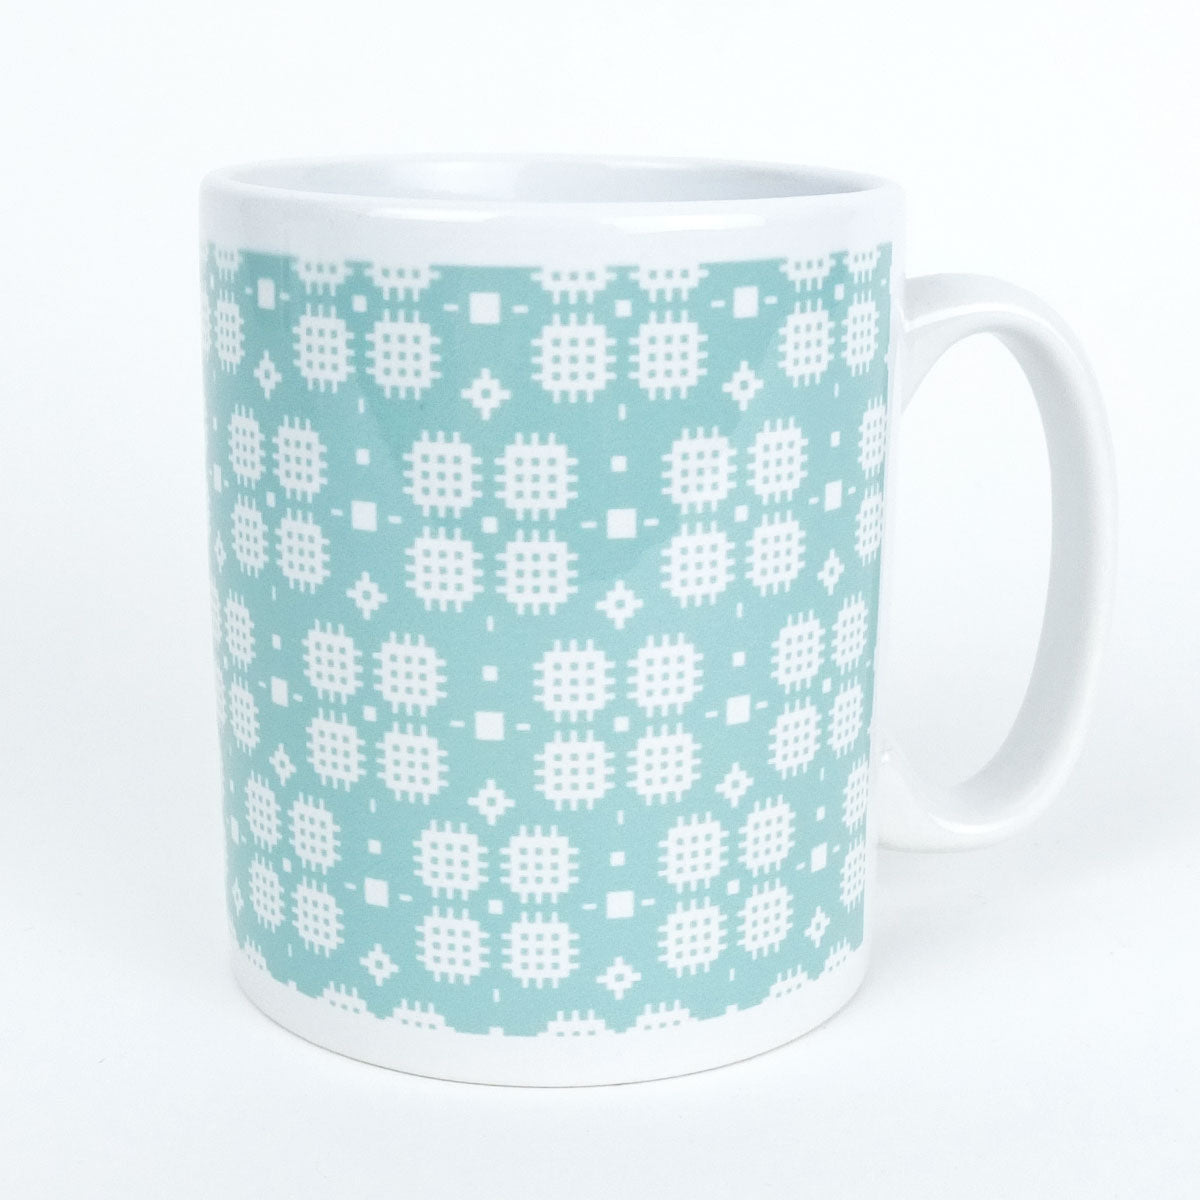 Welsh Tapestry print Mug in Turquoise Green